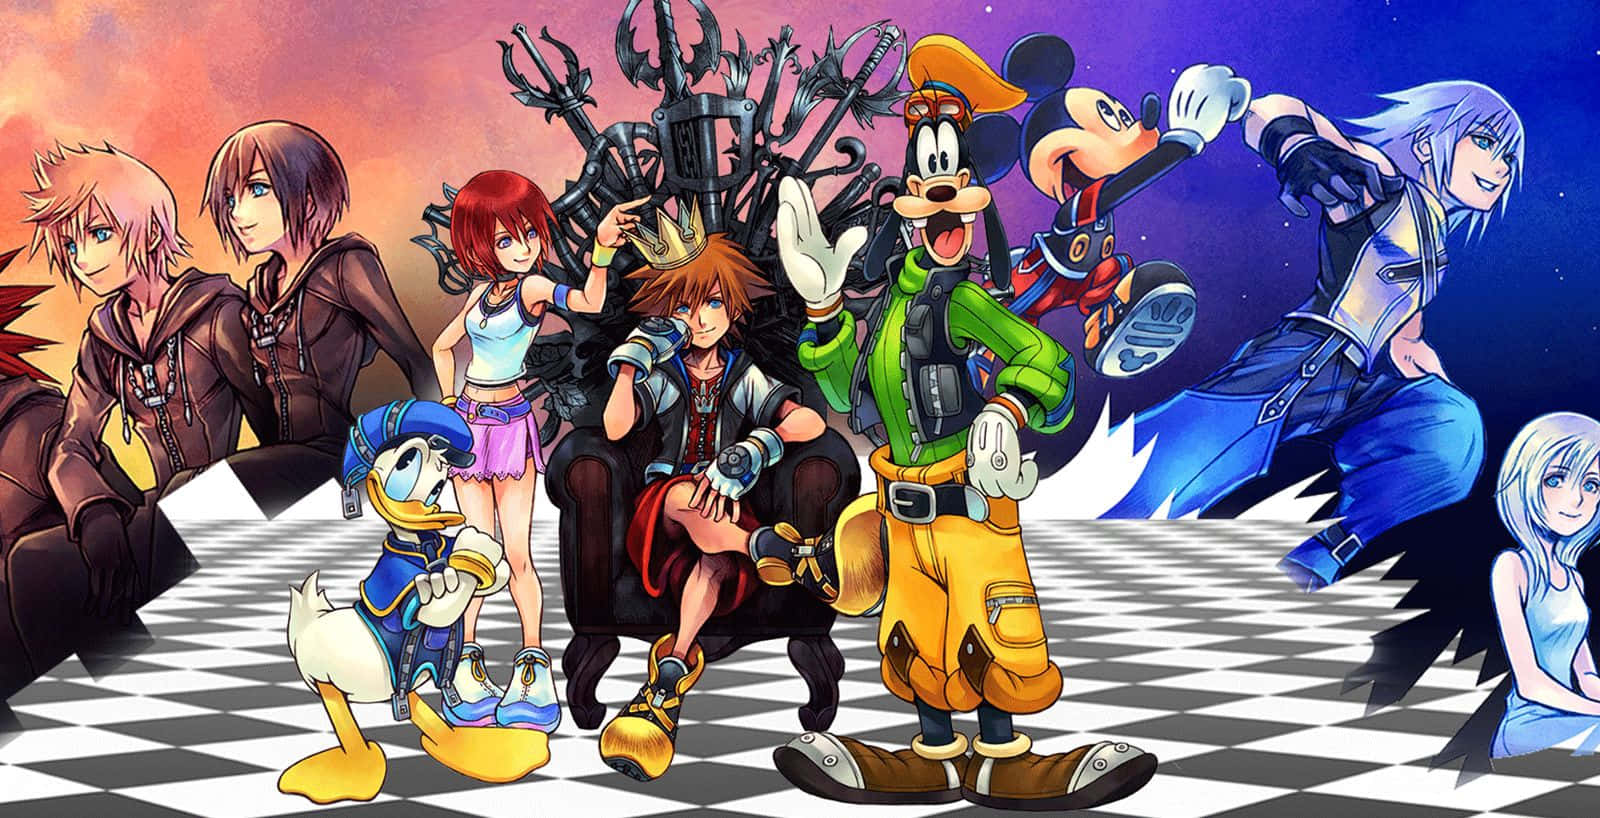 The Beloved Ensemble of Kingdom Hearts Characters Wallpaper